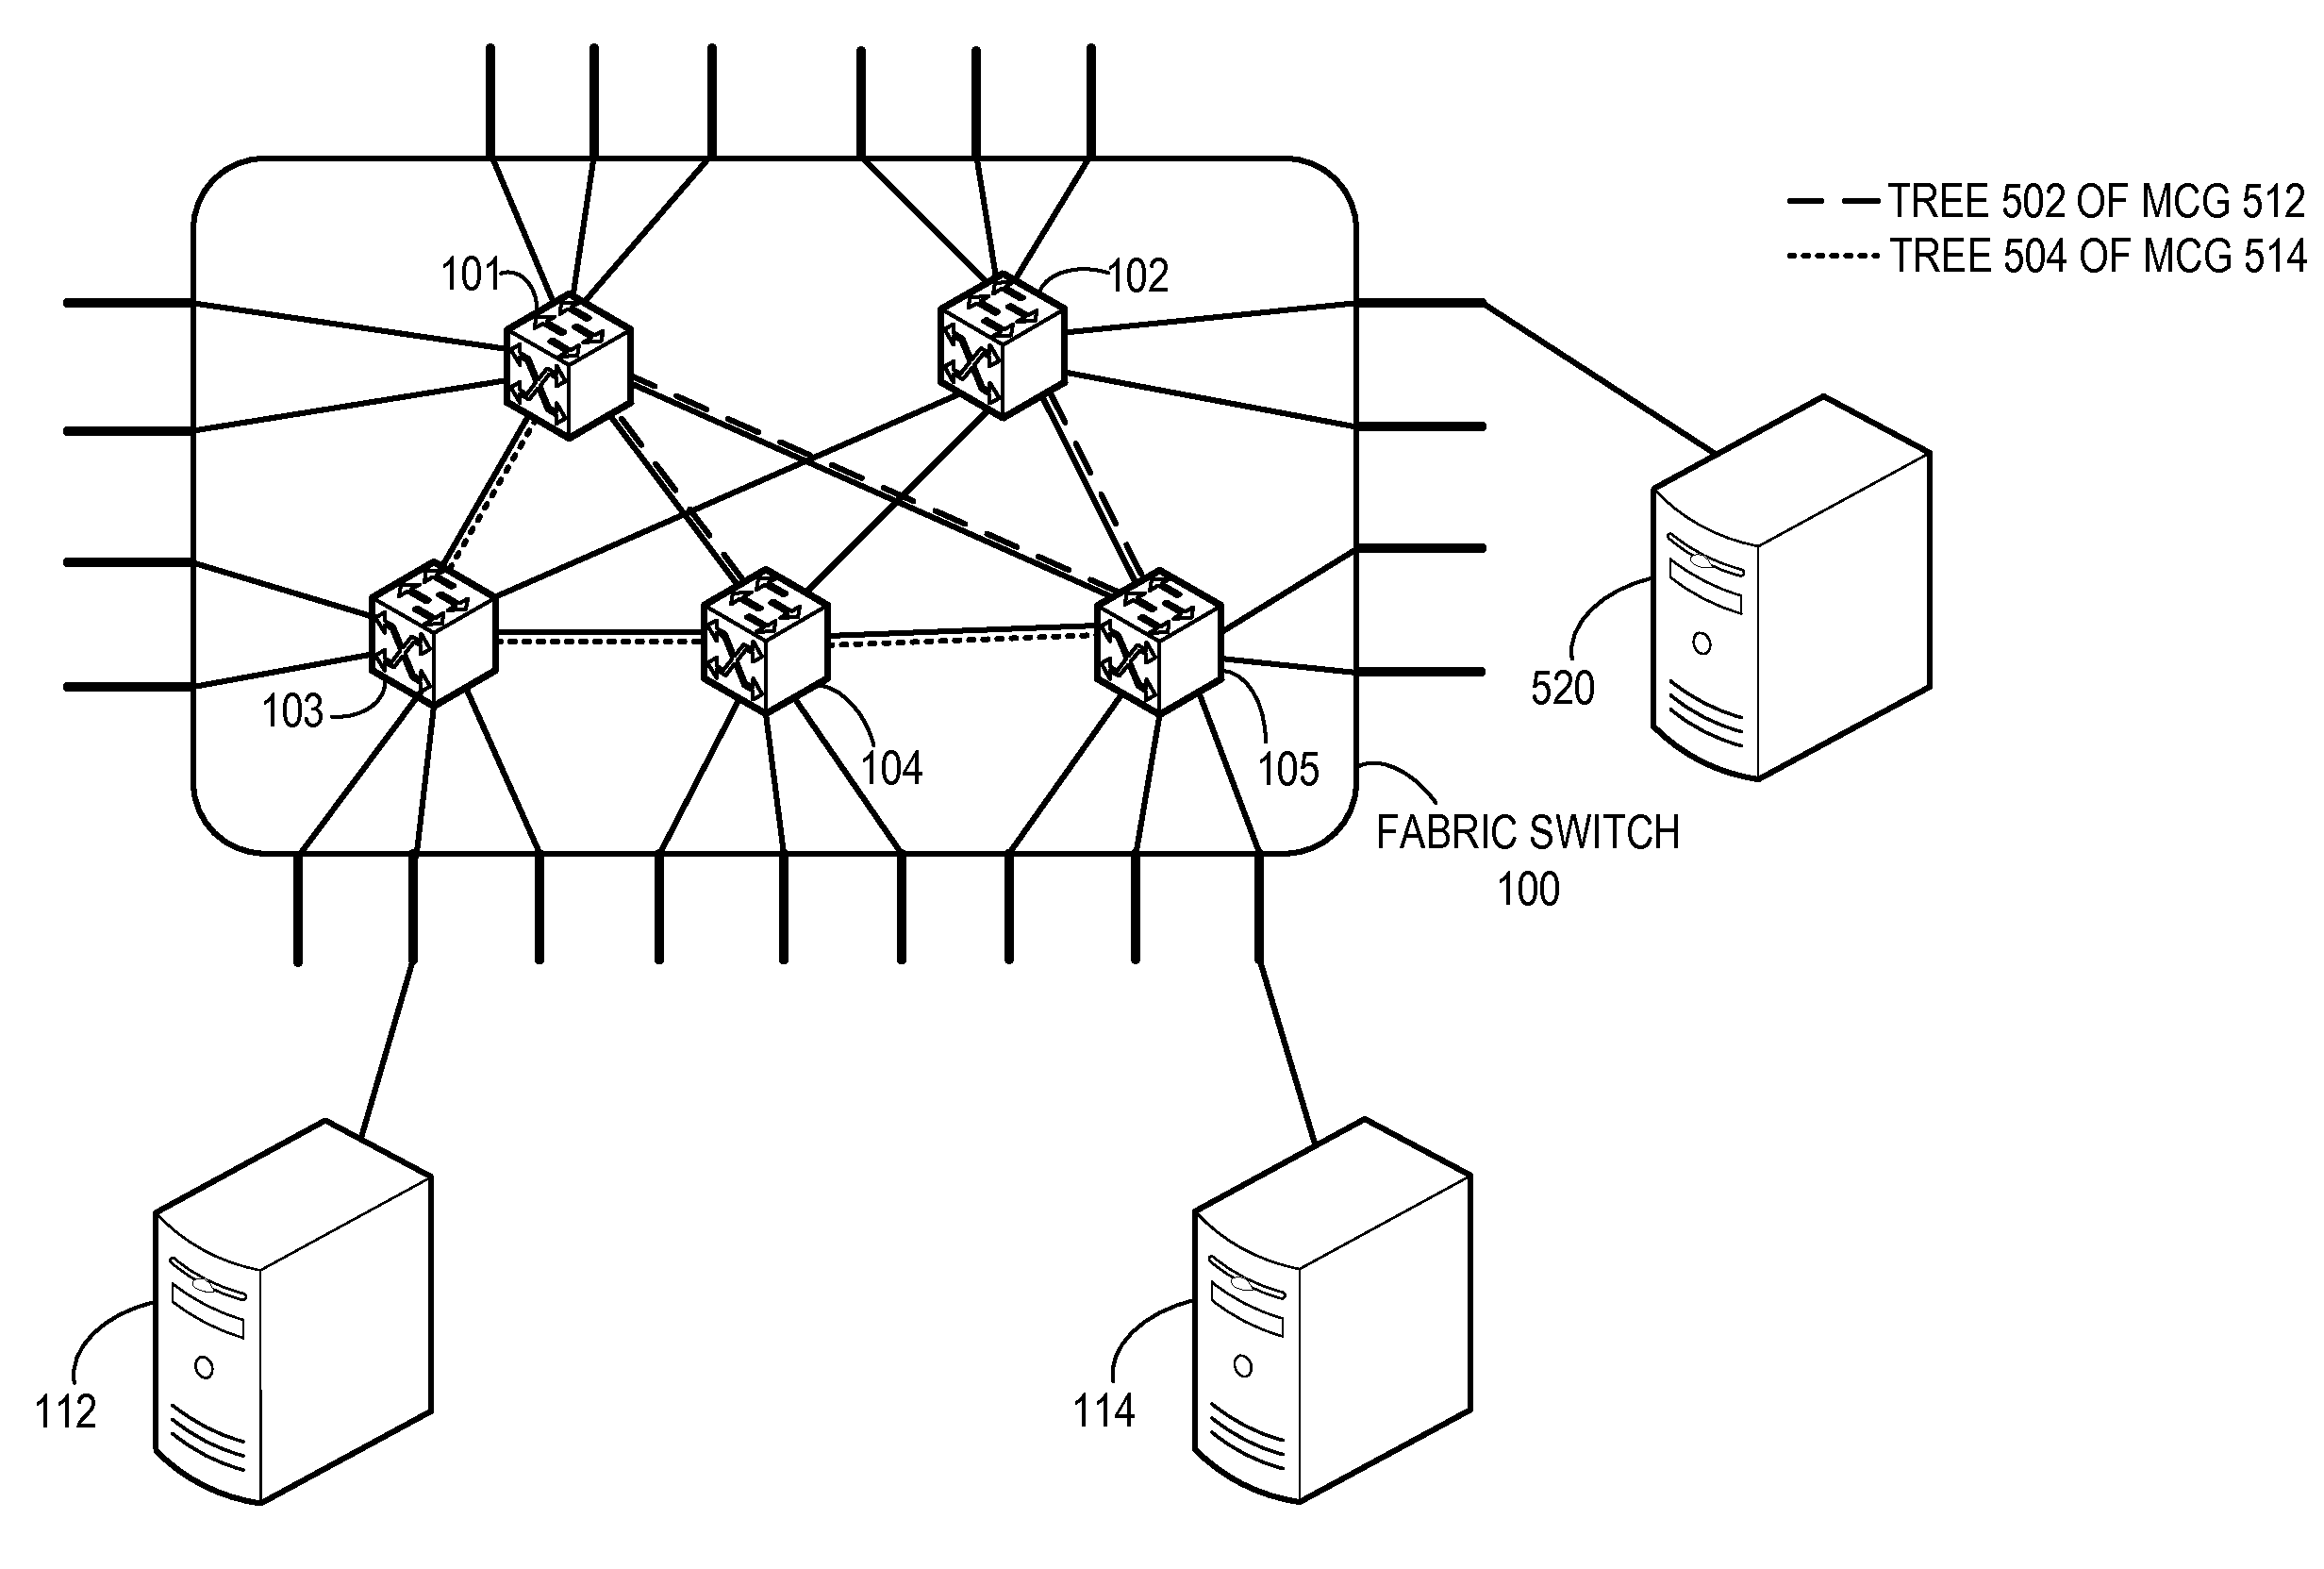 Ingress switch multicast distribution in a fabric switch